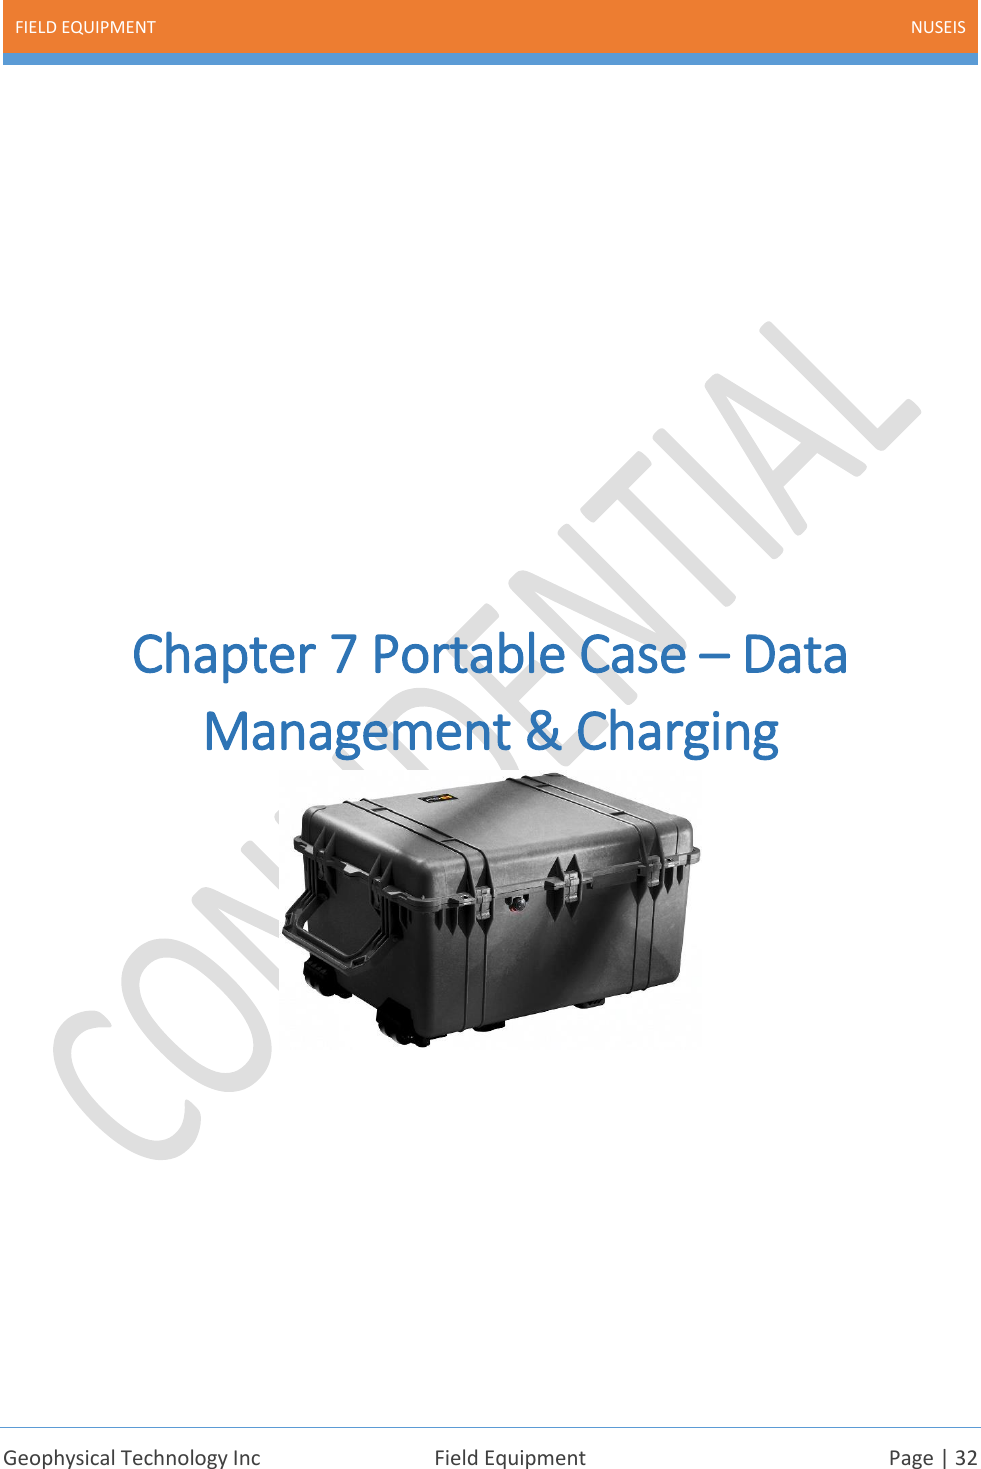 FIELD EQUIPMENT NUSEIS    Geophysical Technology Inc  Field Equipment  Page | 32             Chapter 7 Portable Case – Data Management &amp; Charging         